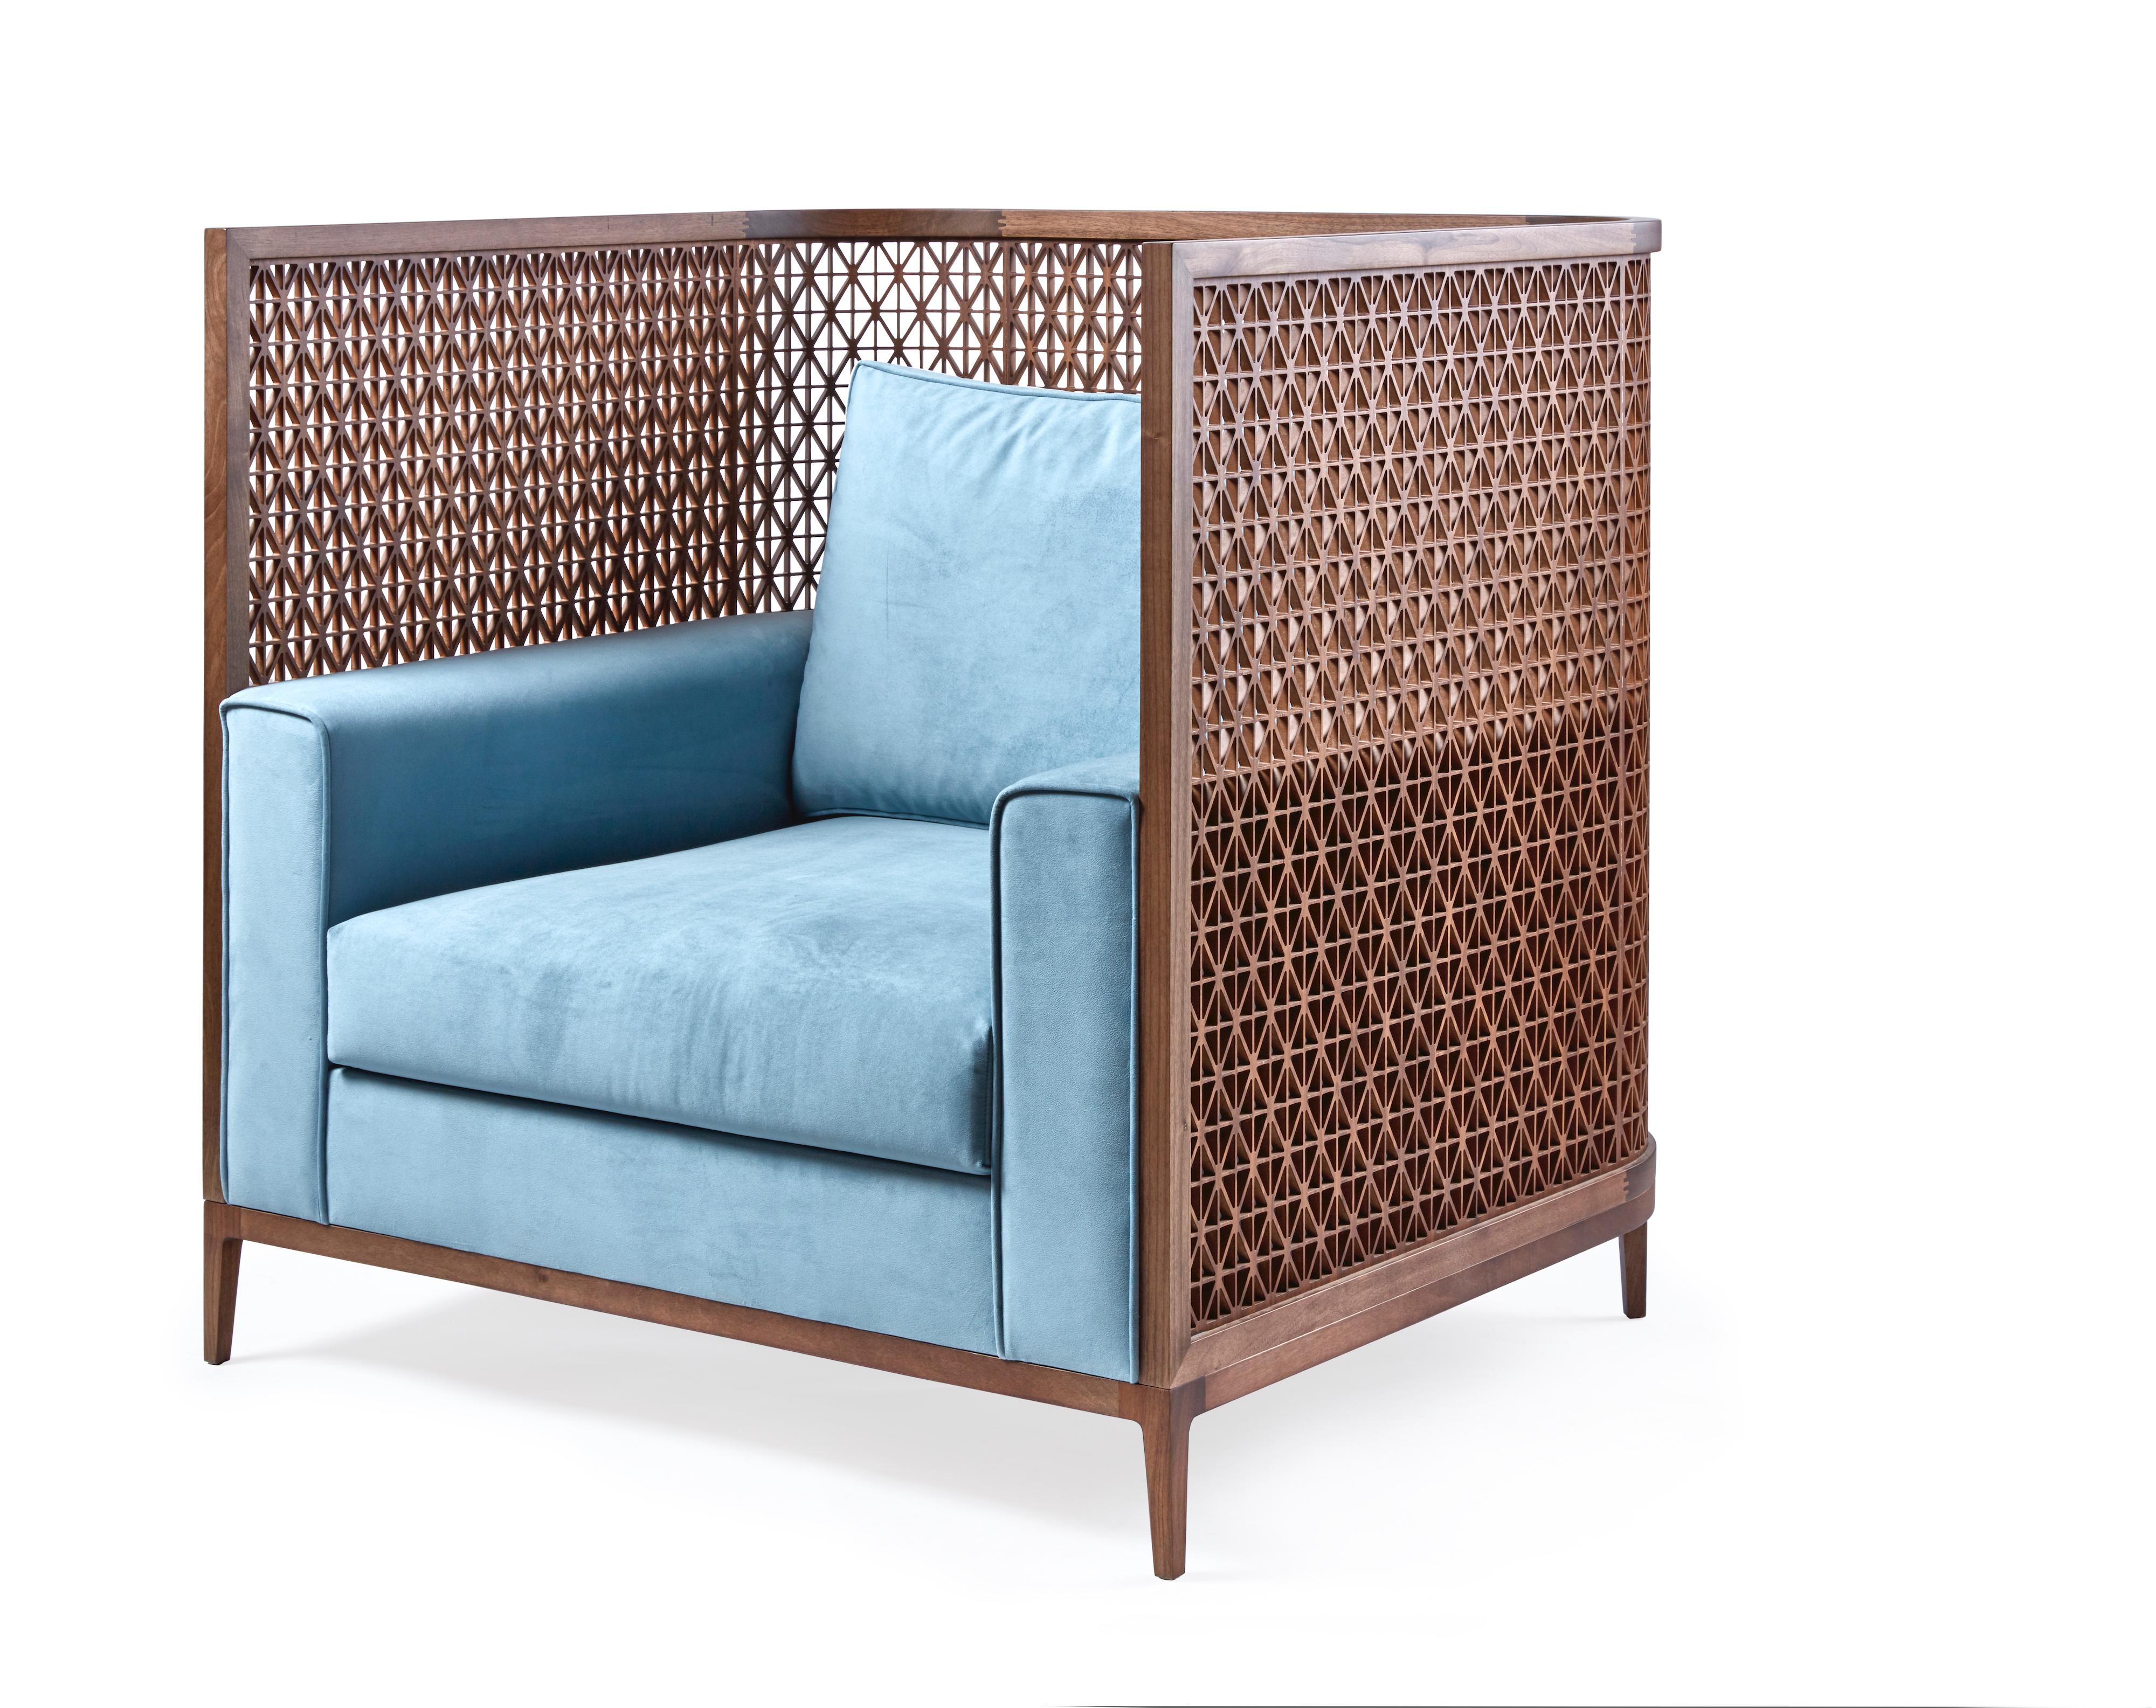 The intricately carved trellis details wrapped around the back of this generously proportioned occasional chair make it ideal to float in a room where it can be admired from every angle.